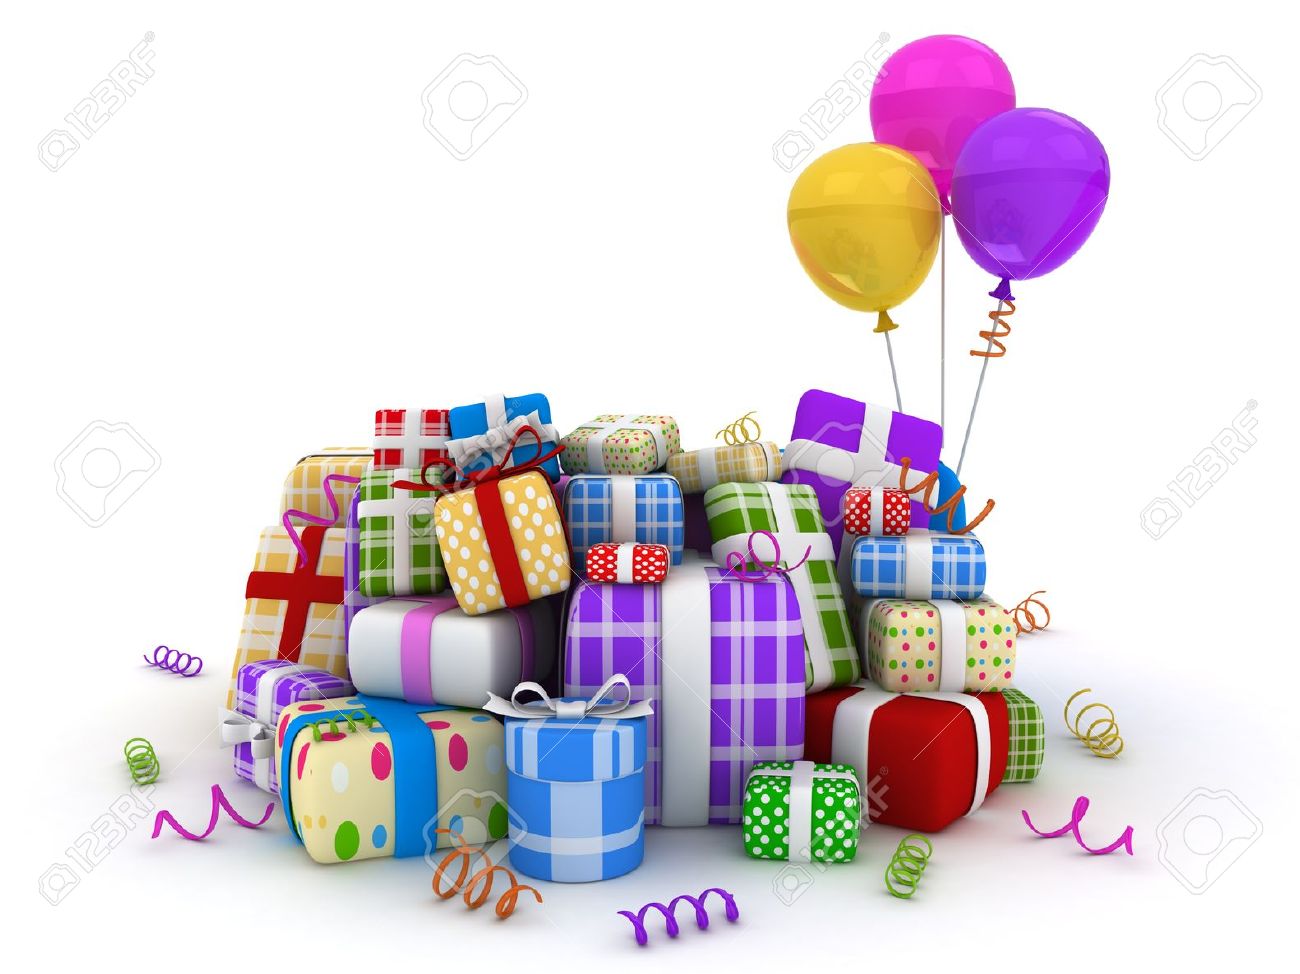 9549559-3D-Illustration-of-Gifts-in-Different-Packages-Stock-Illustration-gifts-birthday-presents.jpg